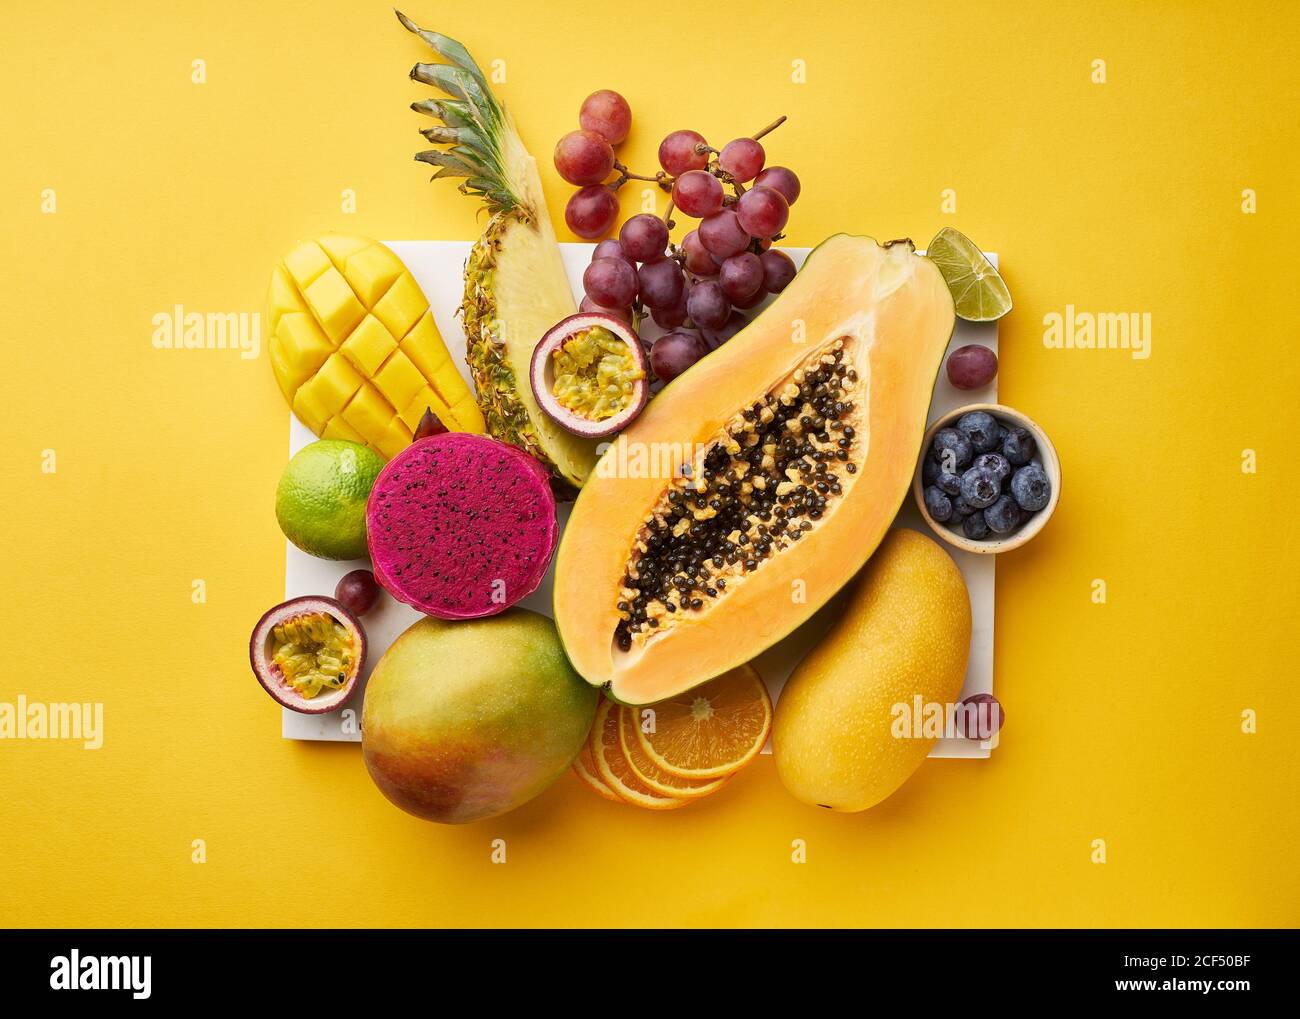 Top view of flat lay with tropical fruits on a tray: papaya, mango, dragon fruit and pineapple on yellow background. Summer treat Stock Photo